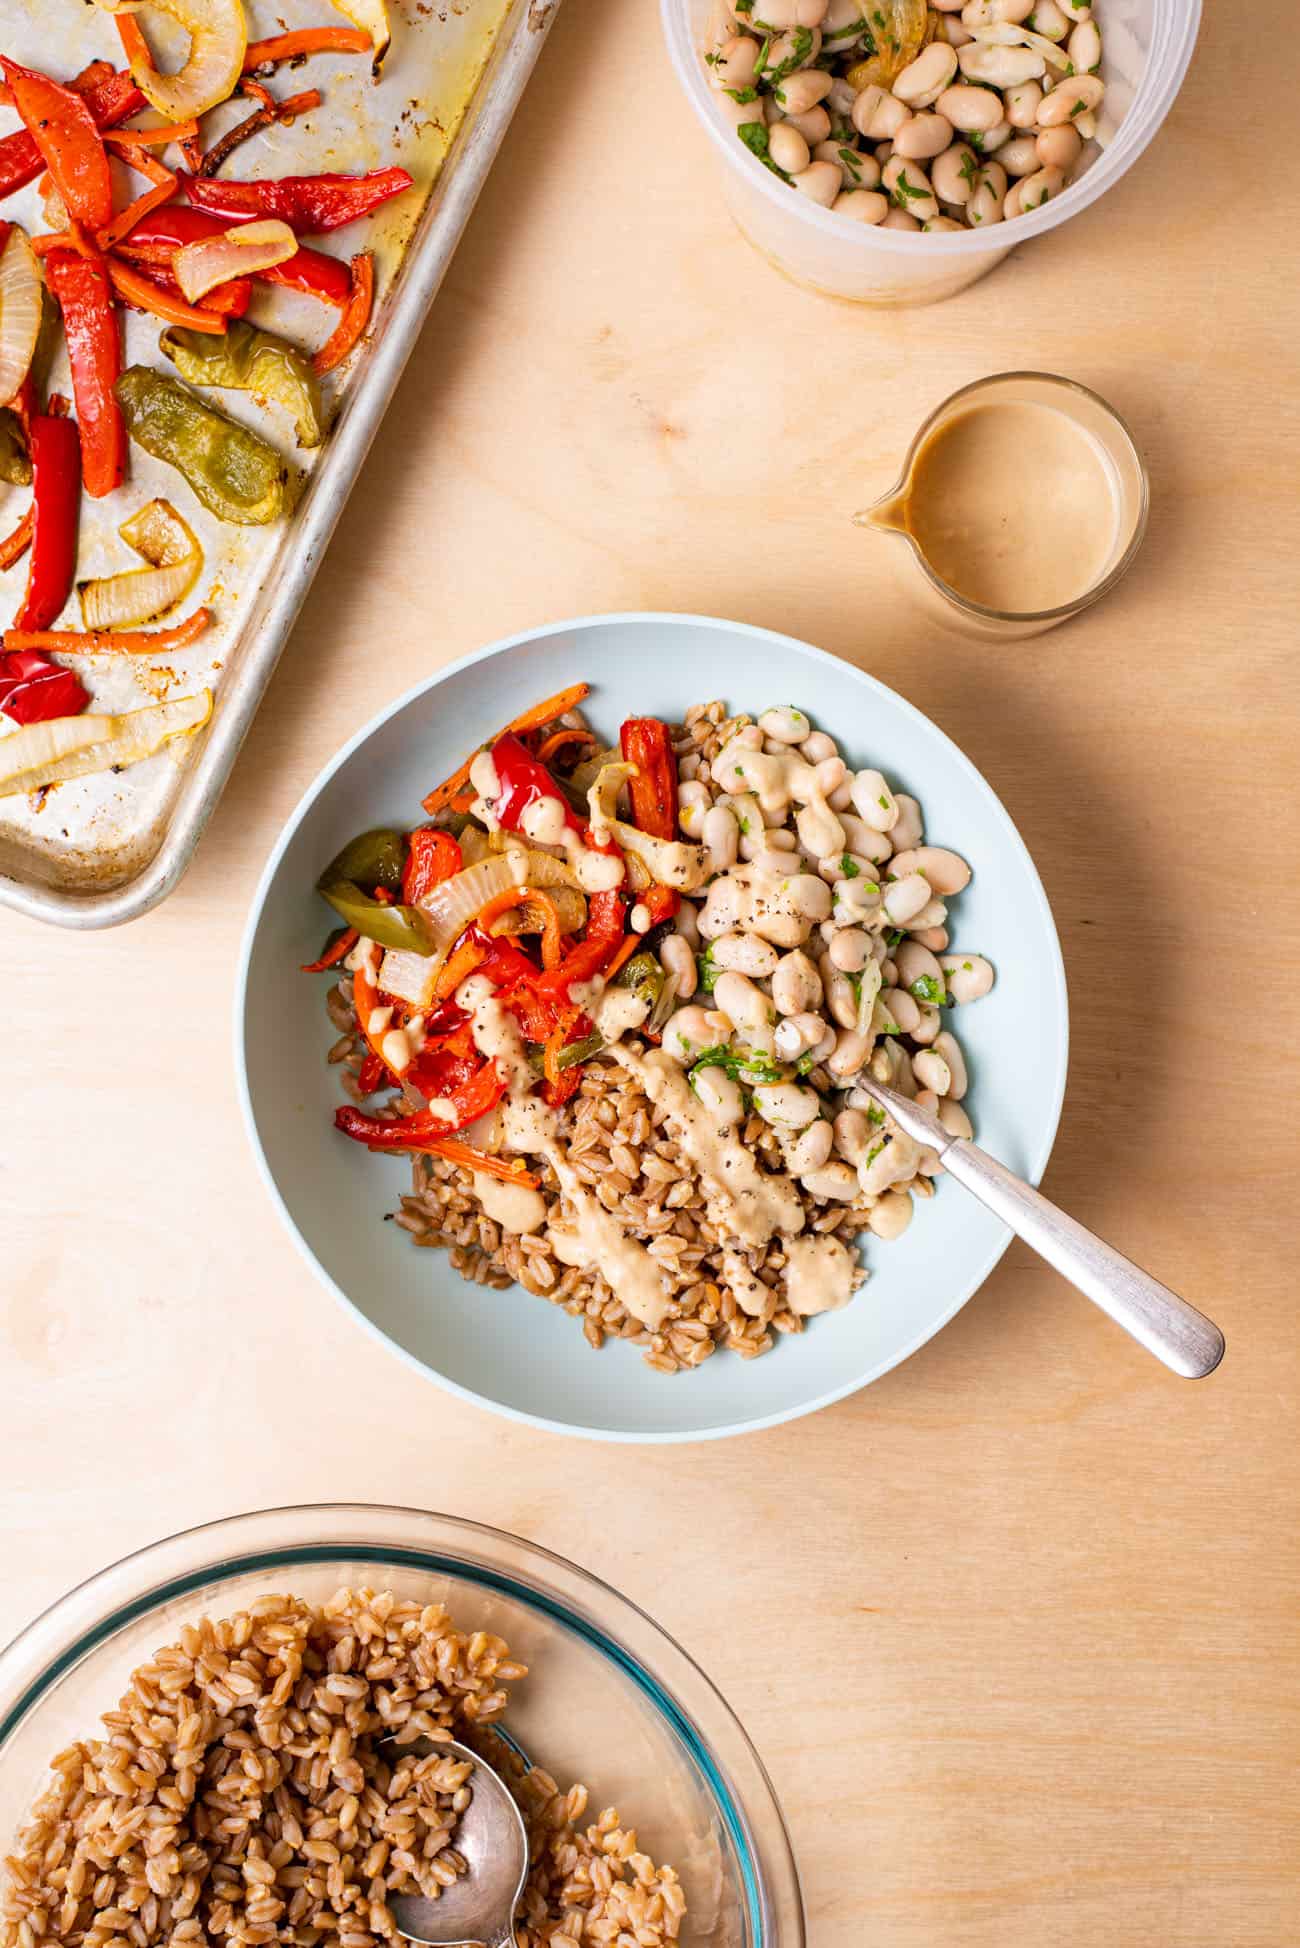 Farro bowl next to a tray of roasted vegetables, white bean salad, and tahini dressing.